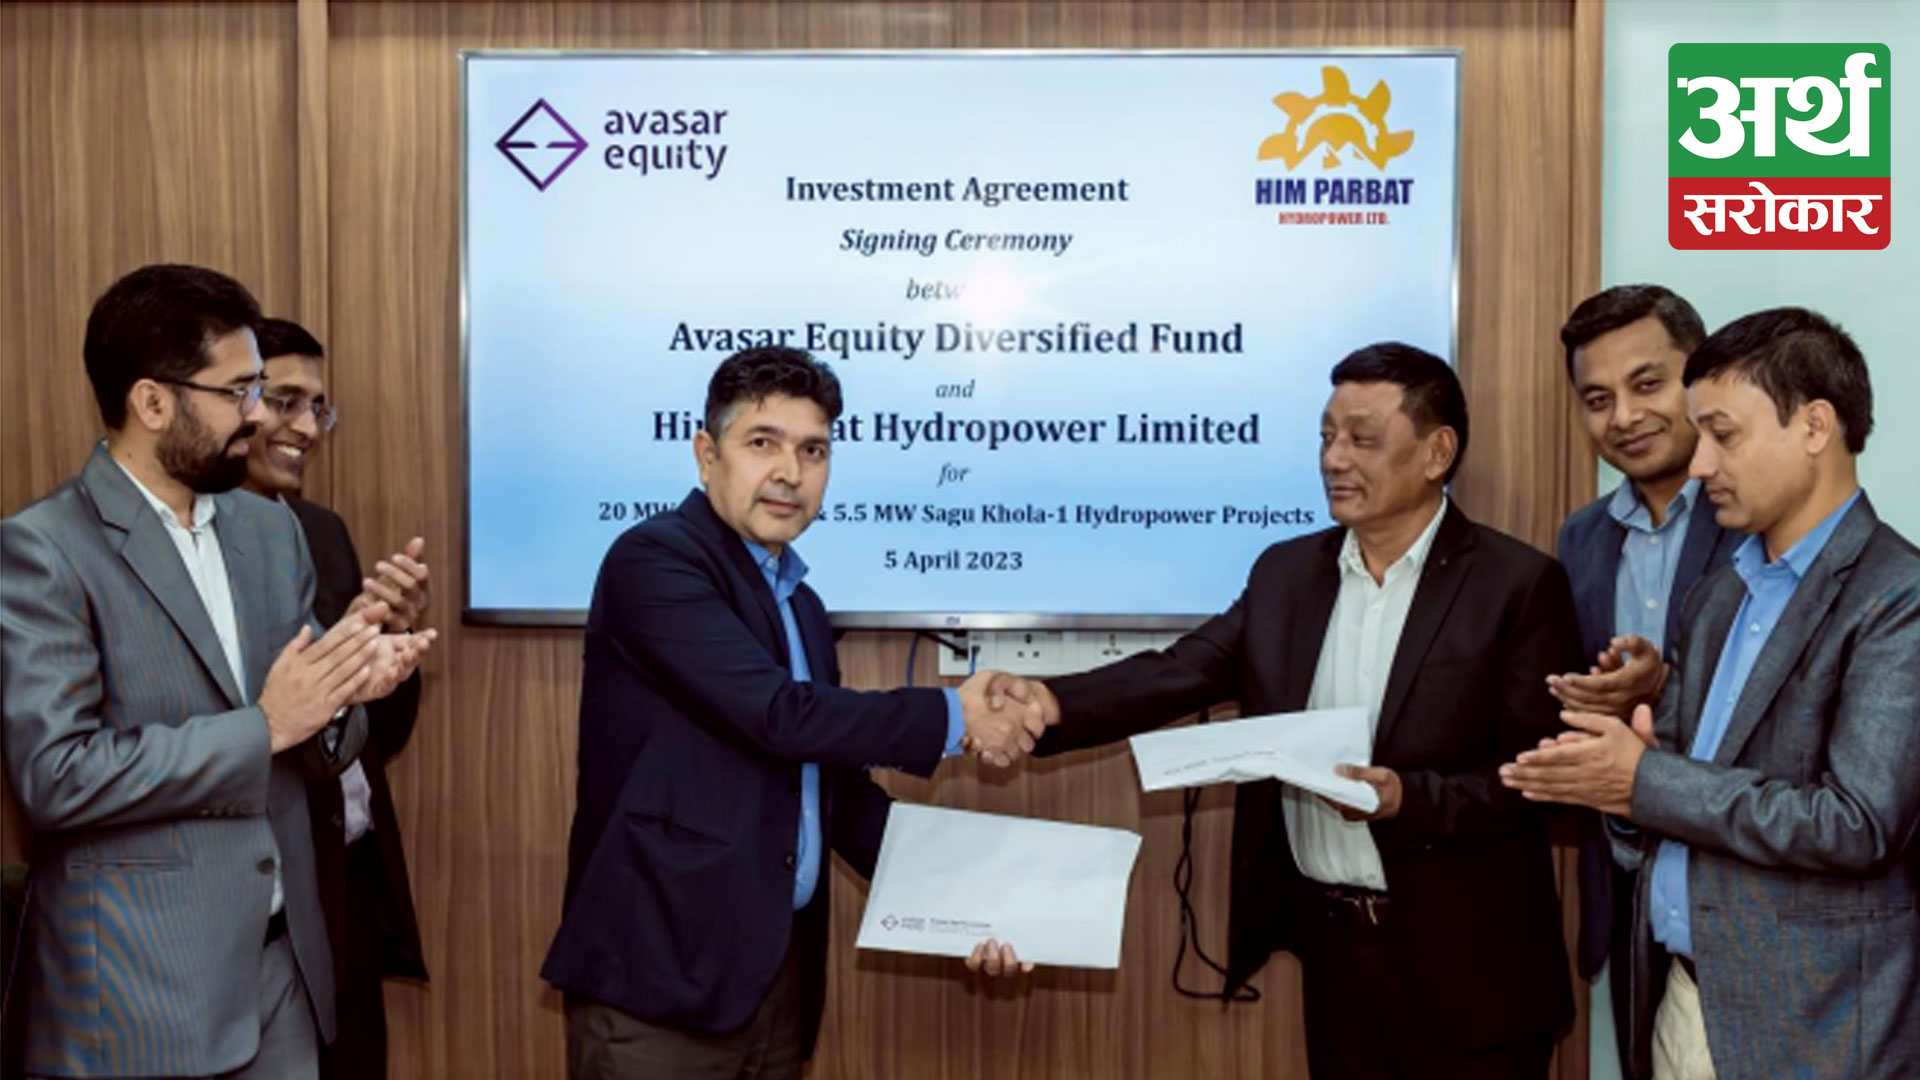 Avasar Equity Diversified Fund to invest NPR 39.06 crore in Him Parbat Hydropower Limited.